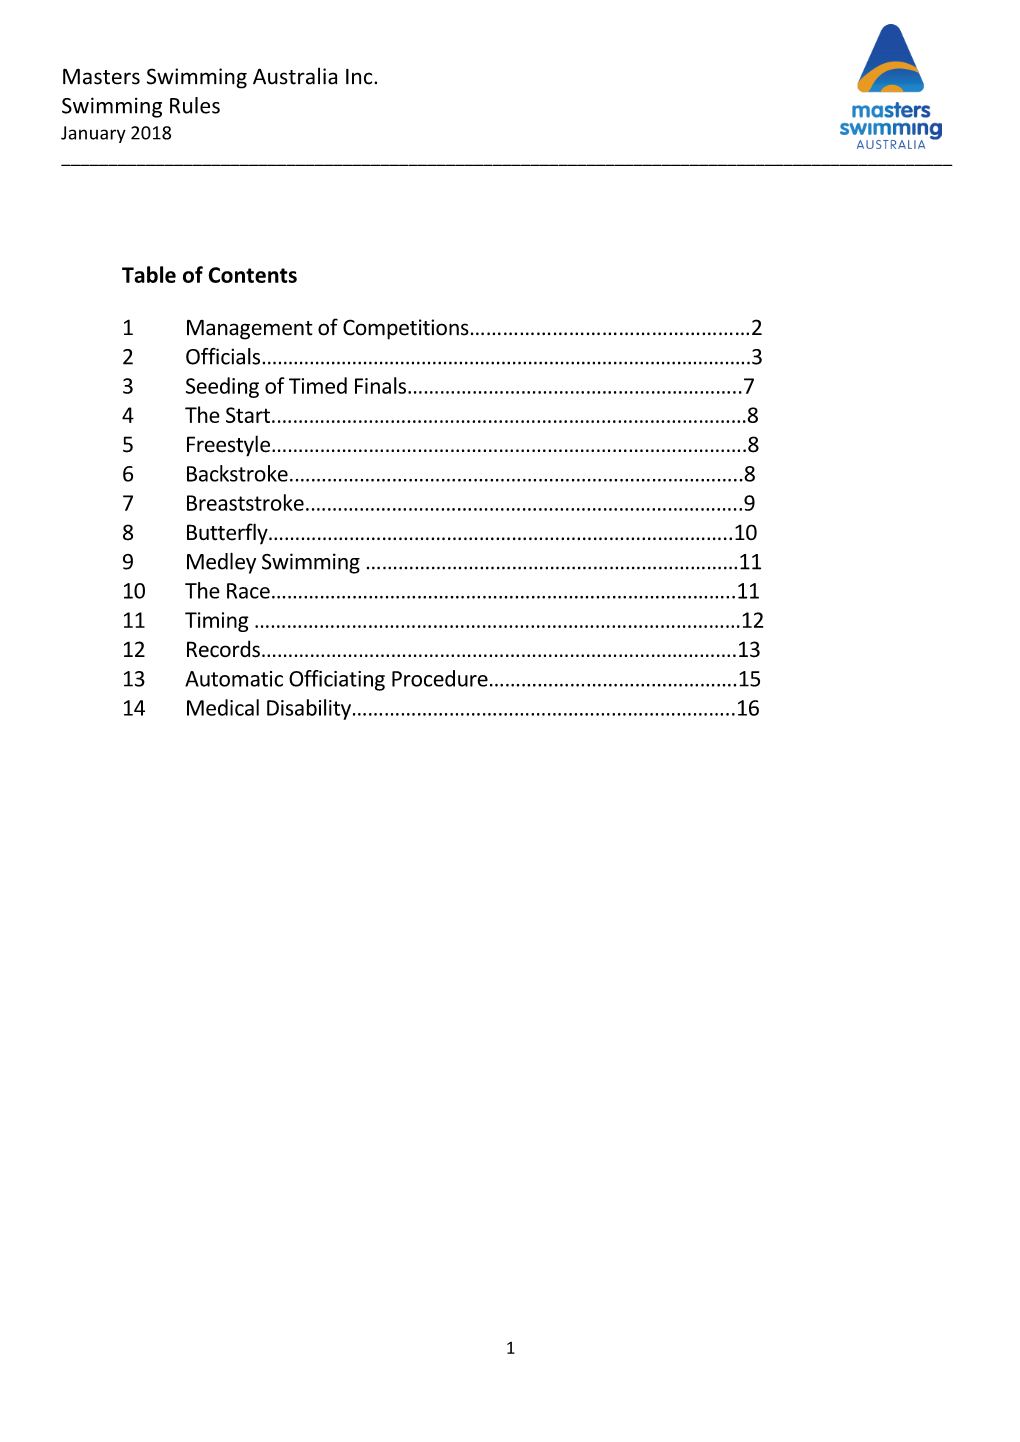 Masters Swimming Australia Inc. Swimming Rules Table of Contents